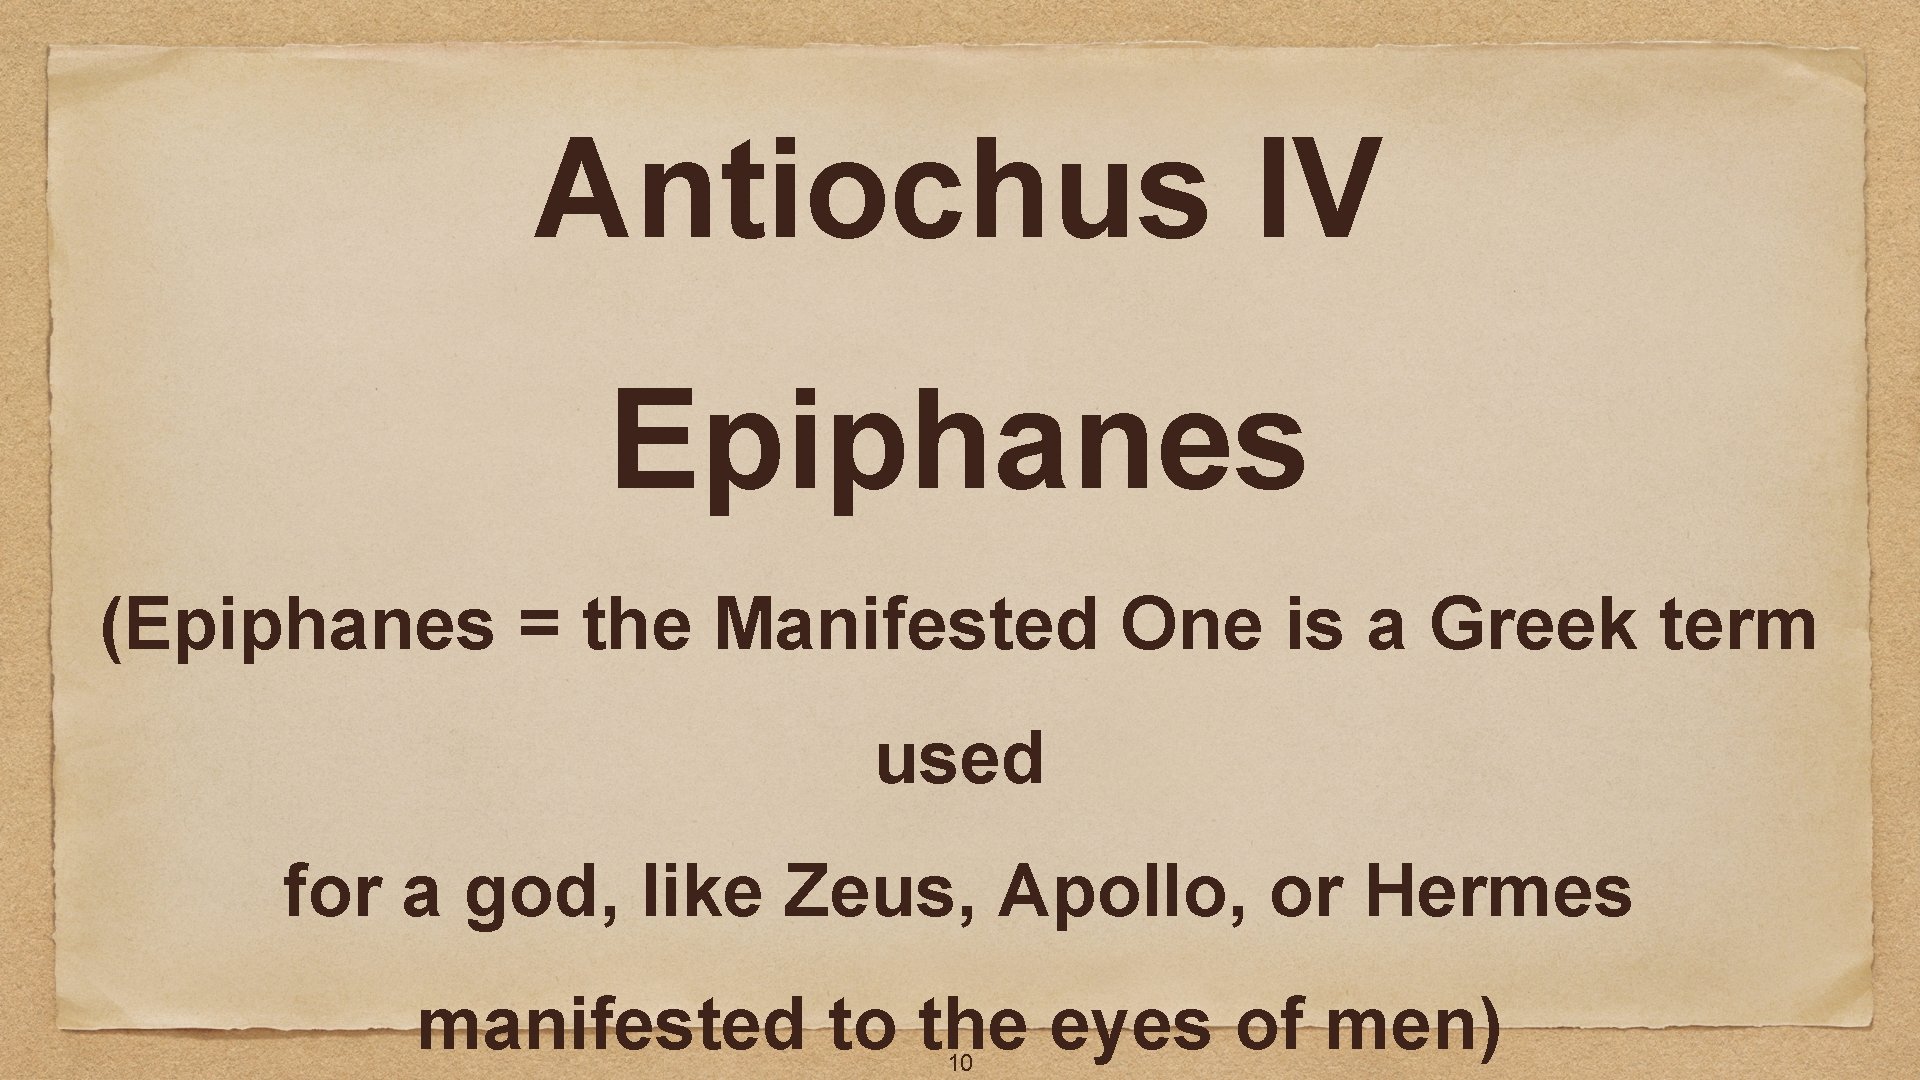 Antiochus IV Epiphanes (Epiphanes = the Manifested One is a Greek term used for